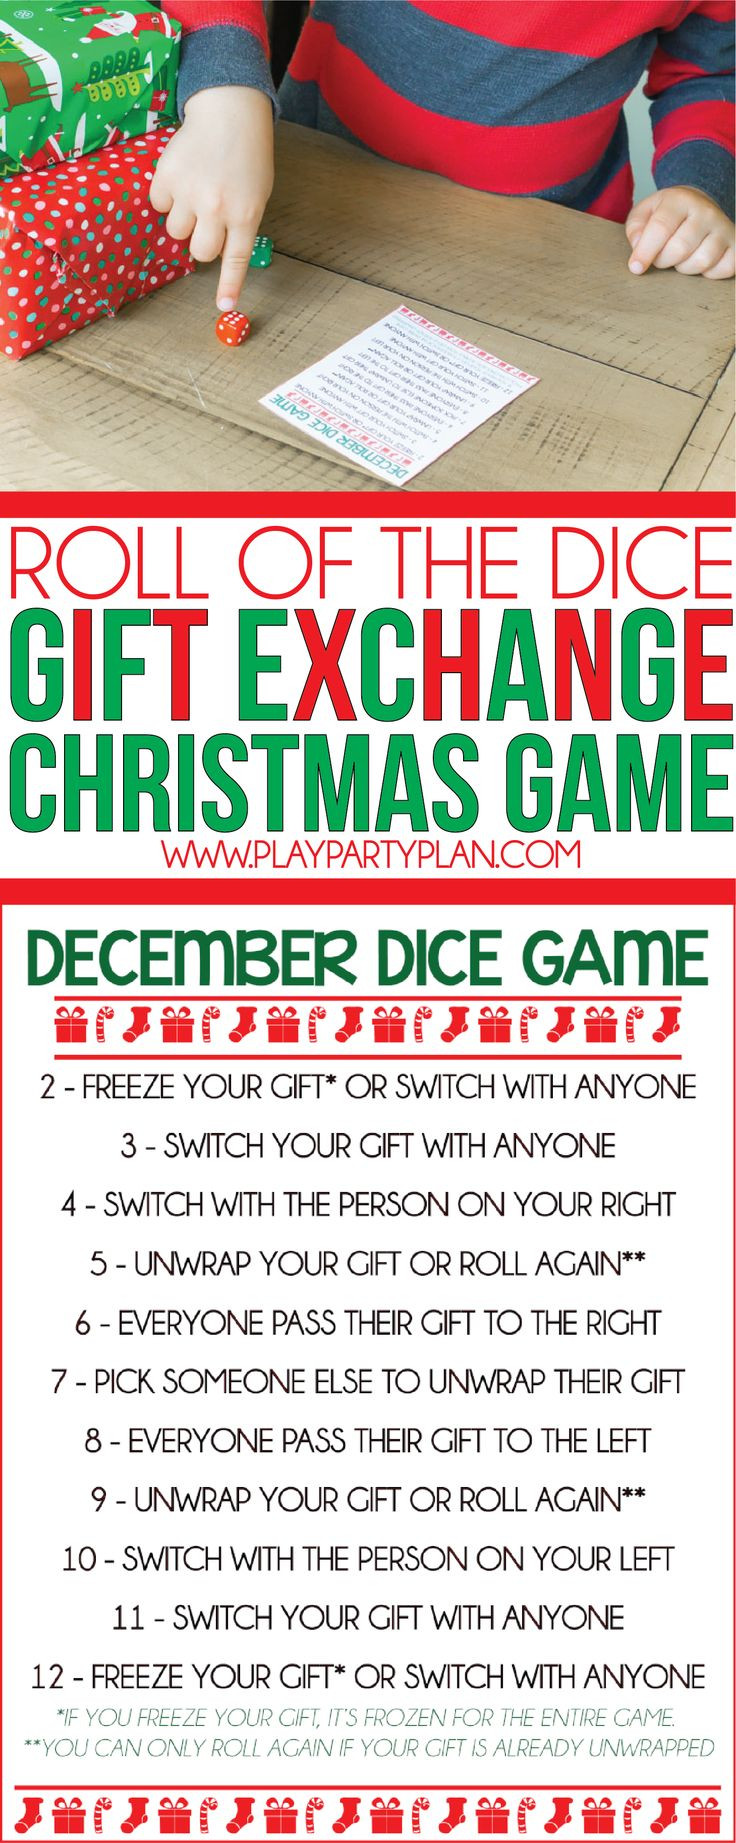 Gift Ideas For Work Christmas Party
 25 unique Gift exchange games ideas on Pinterest